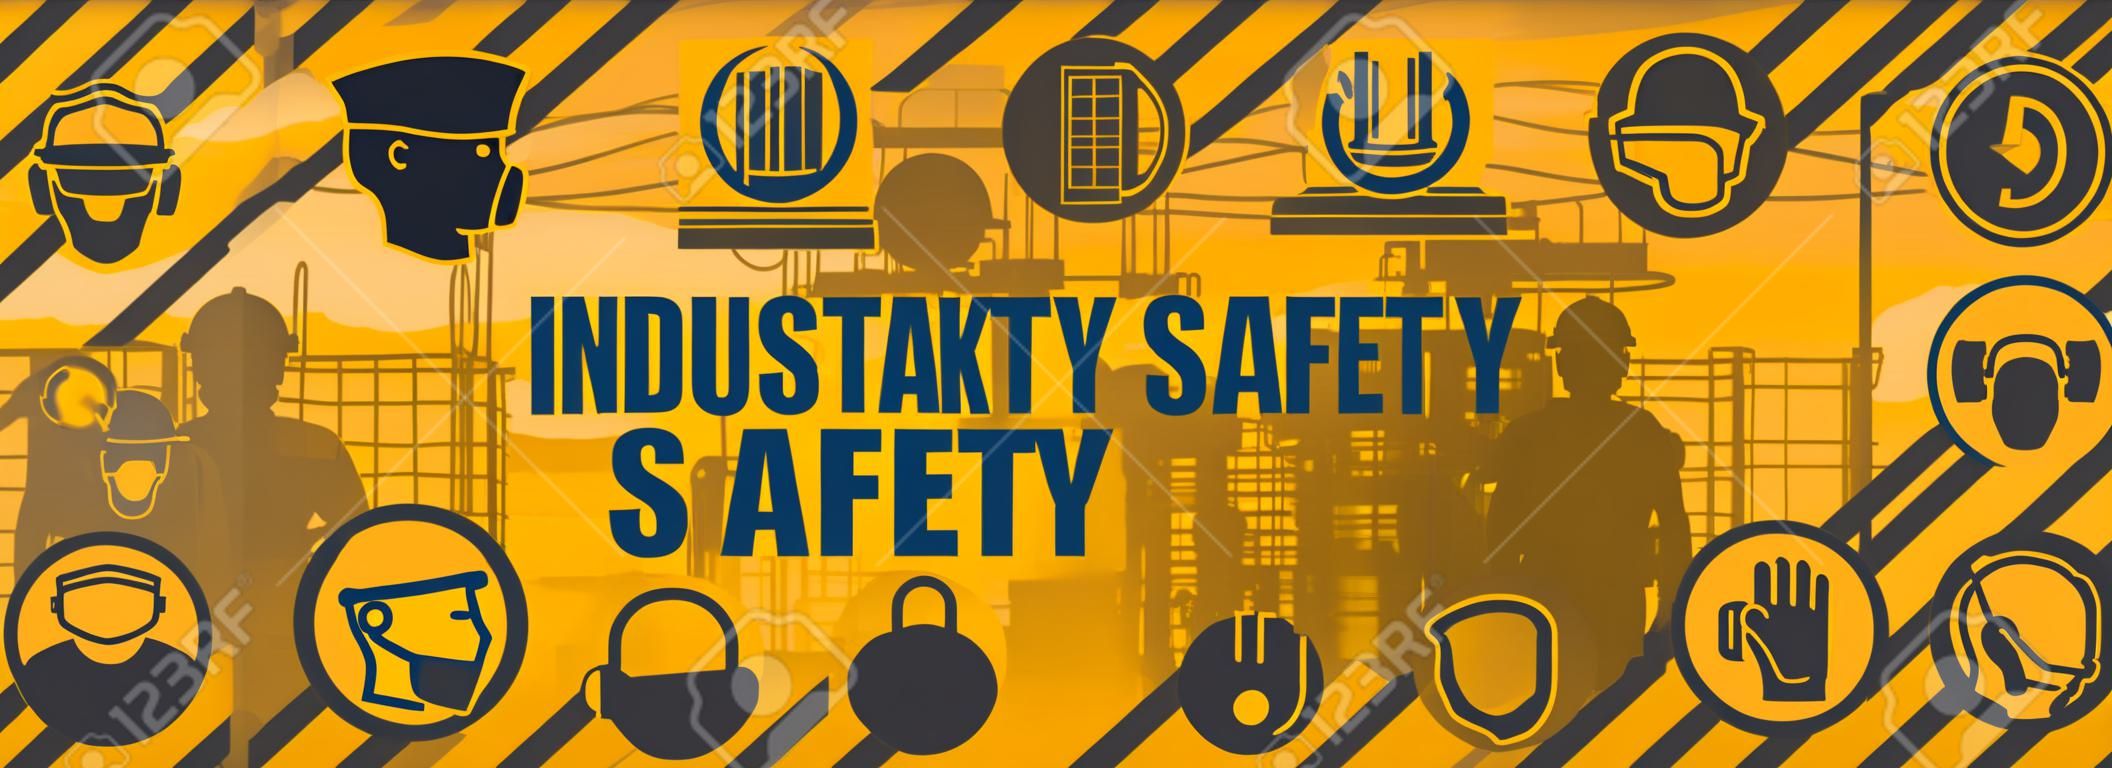 Background of icons, pictograms of industrial safety and occupational health. Personal protection equipment for the prevention of occupational risks and accidents